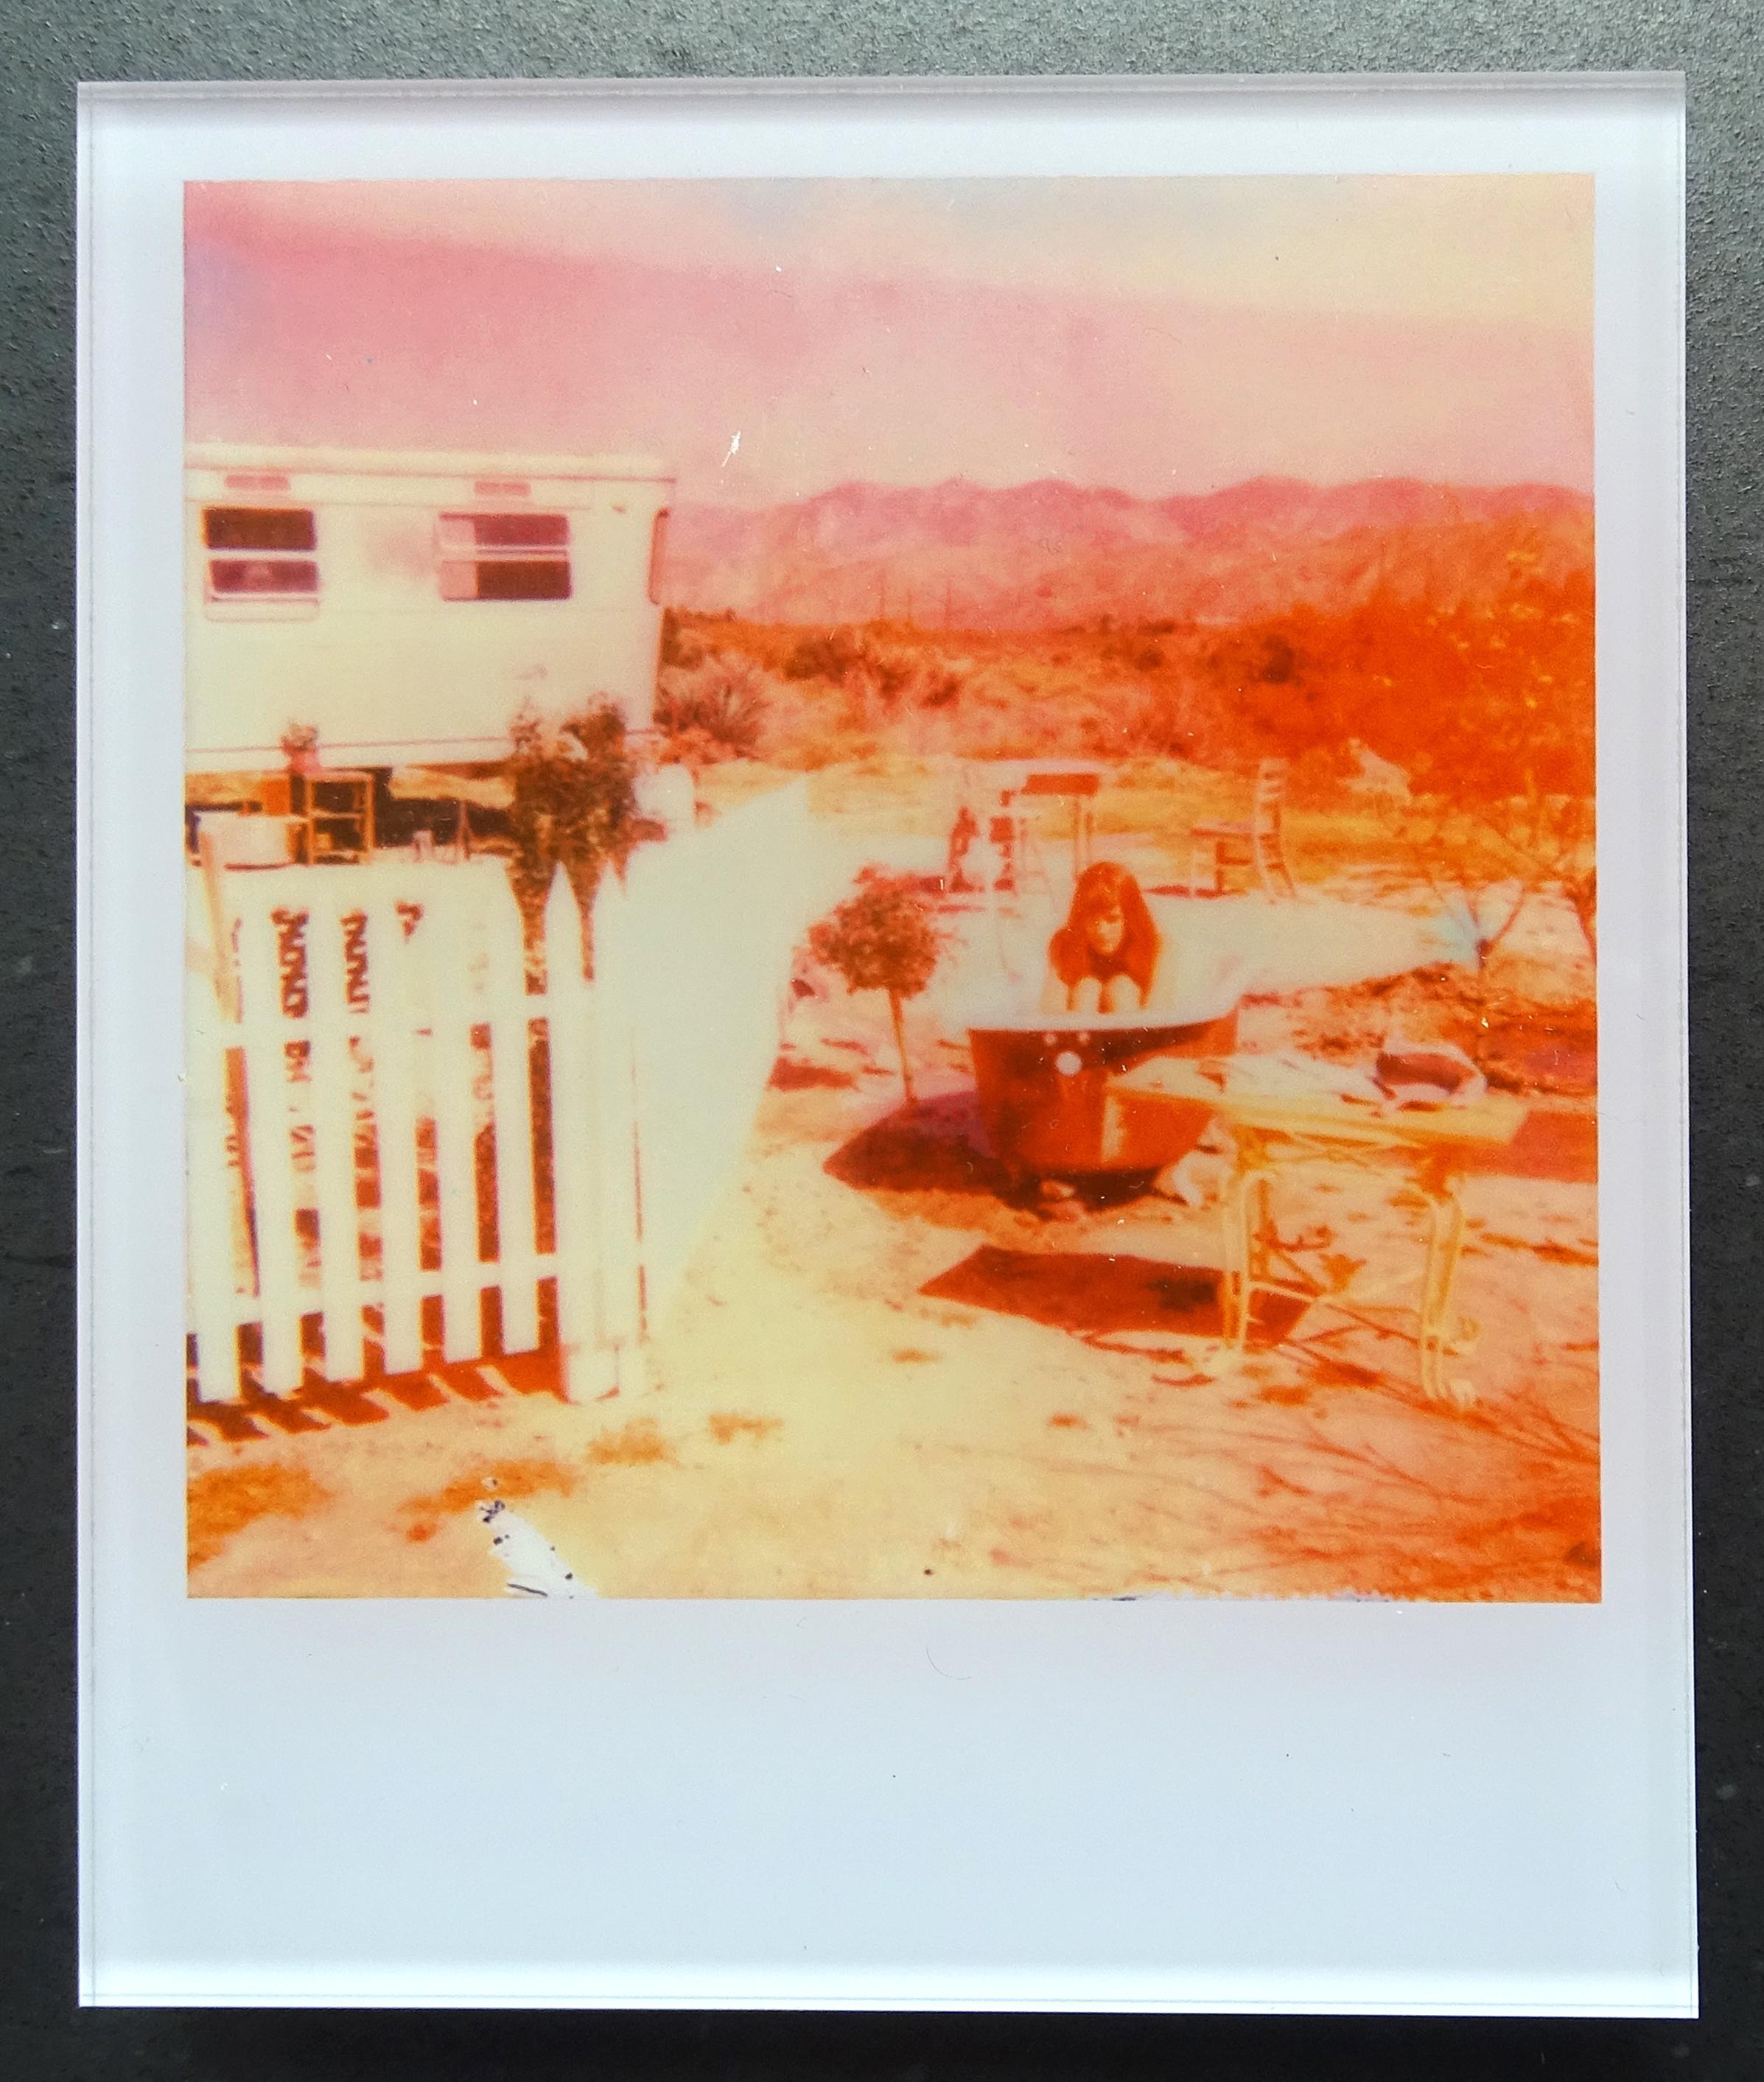 Stefanie Schneider Minis - The Girl (The Girl behind the White Fence) - 2013

signed and signature brand on verso
Lambda digital Color Photographs based on the Polaroid

Polaroid sized open Editions 1999-2013
10.7 x 8.8cm (Image 7.9x7.7cm)
mounted: